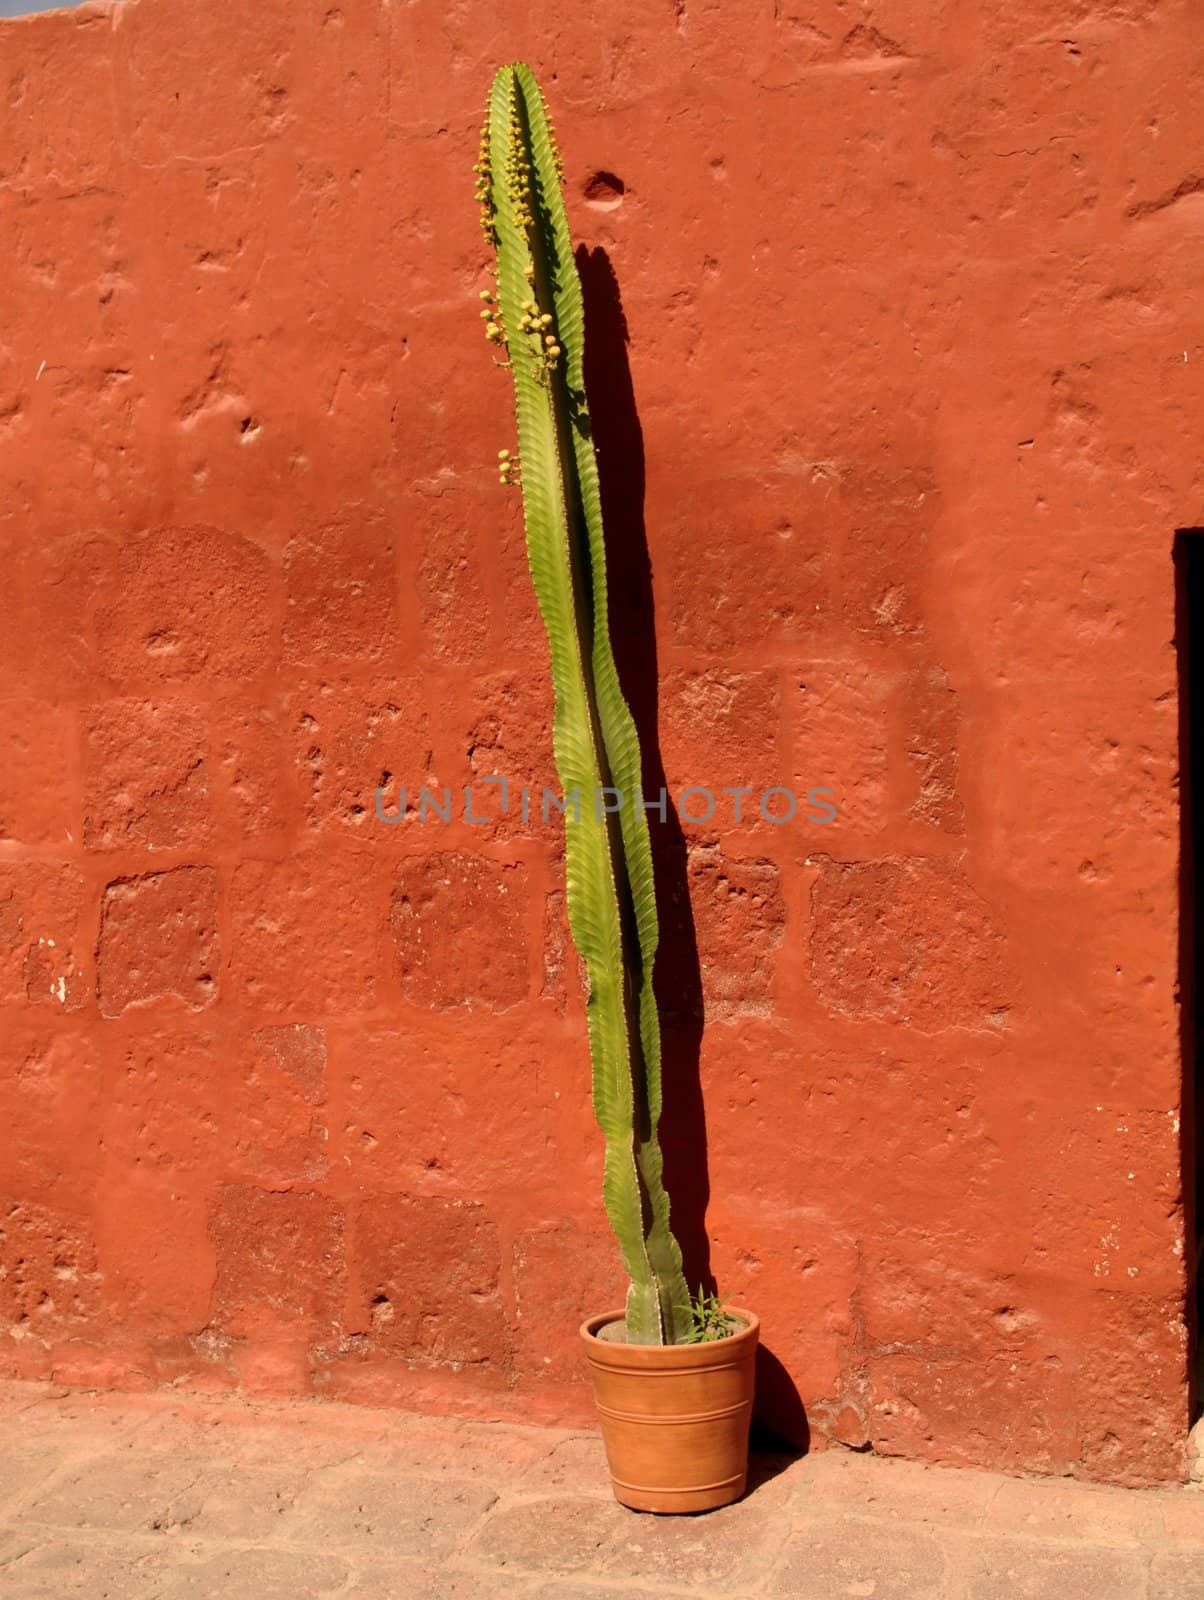 Green cactus in front of the red wall